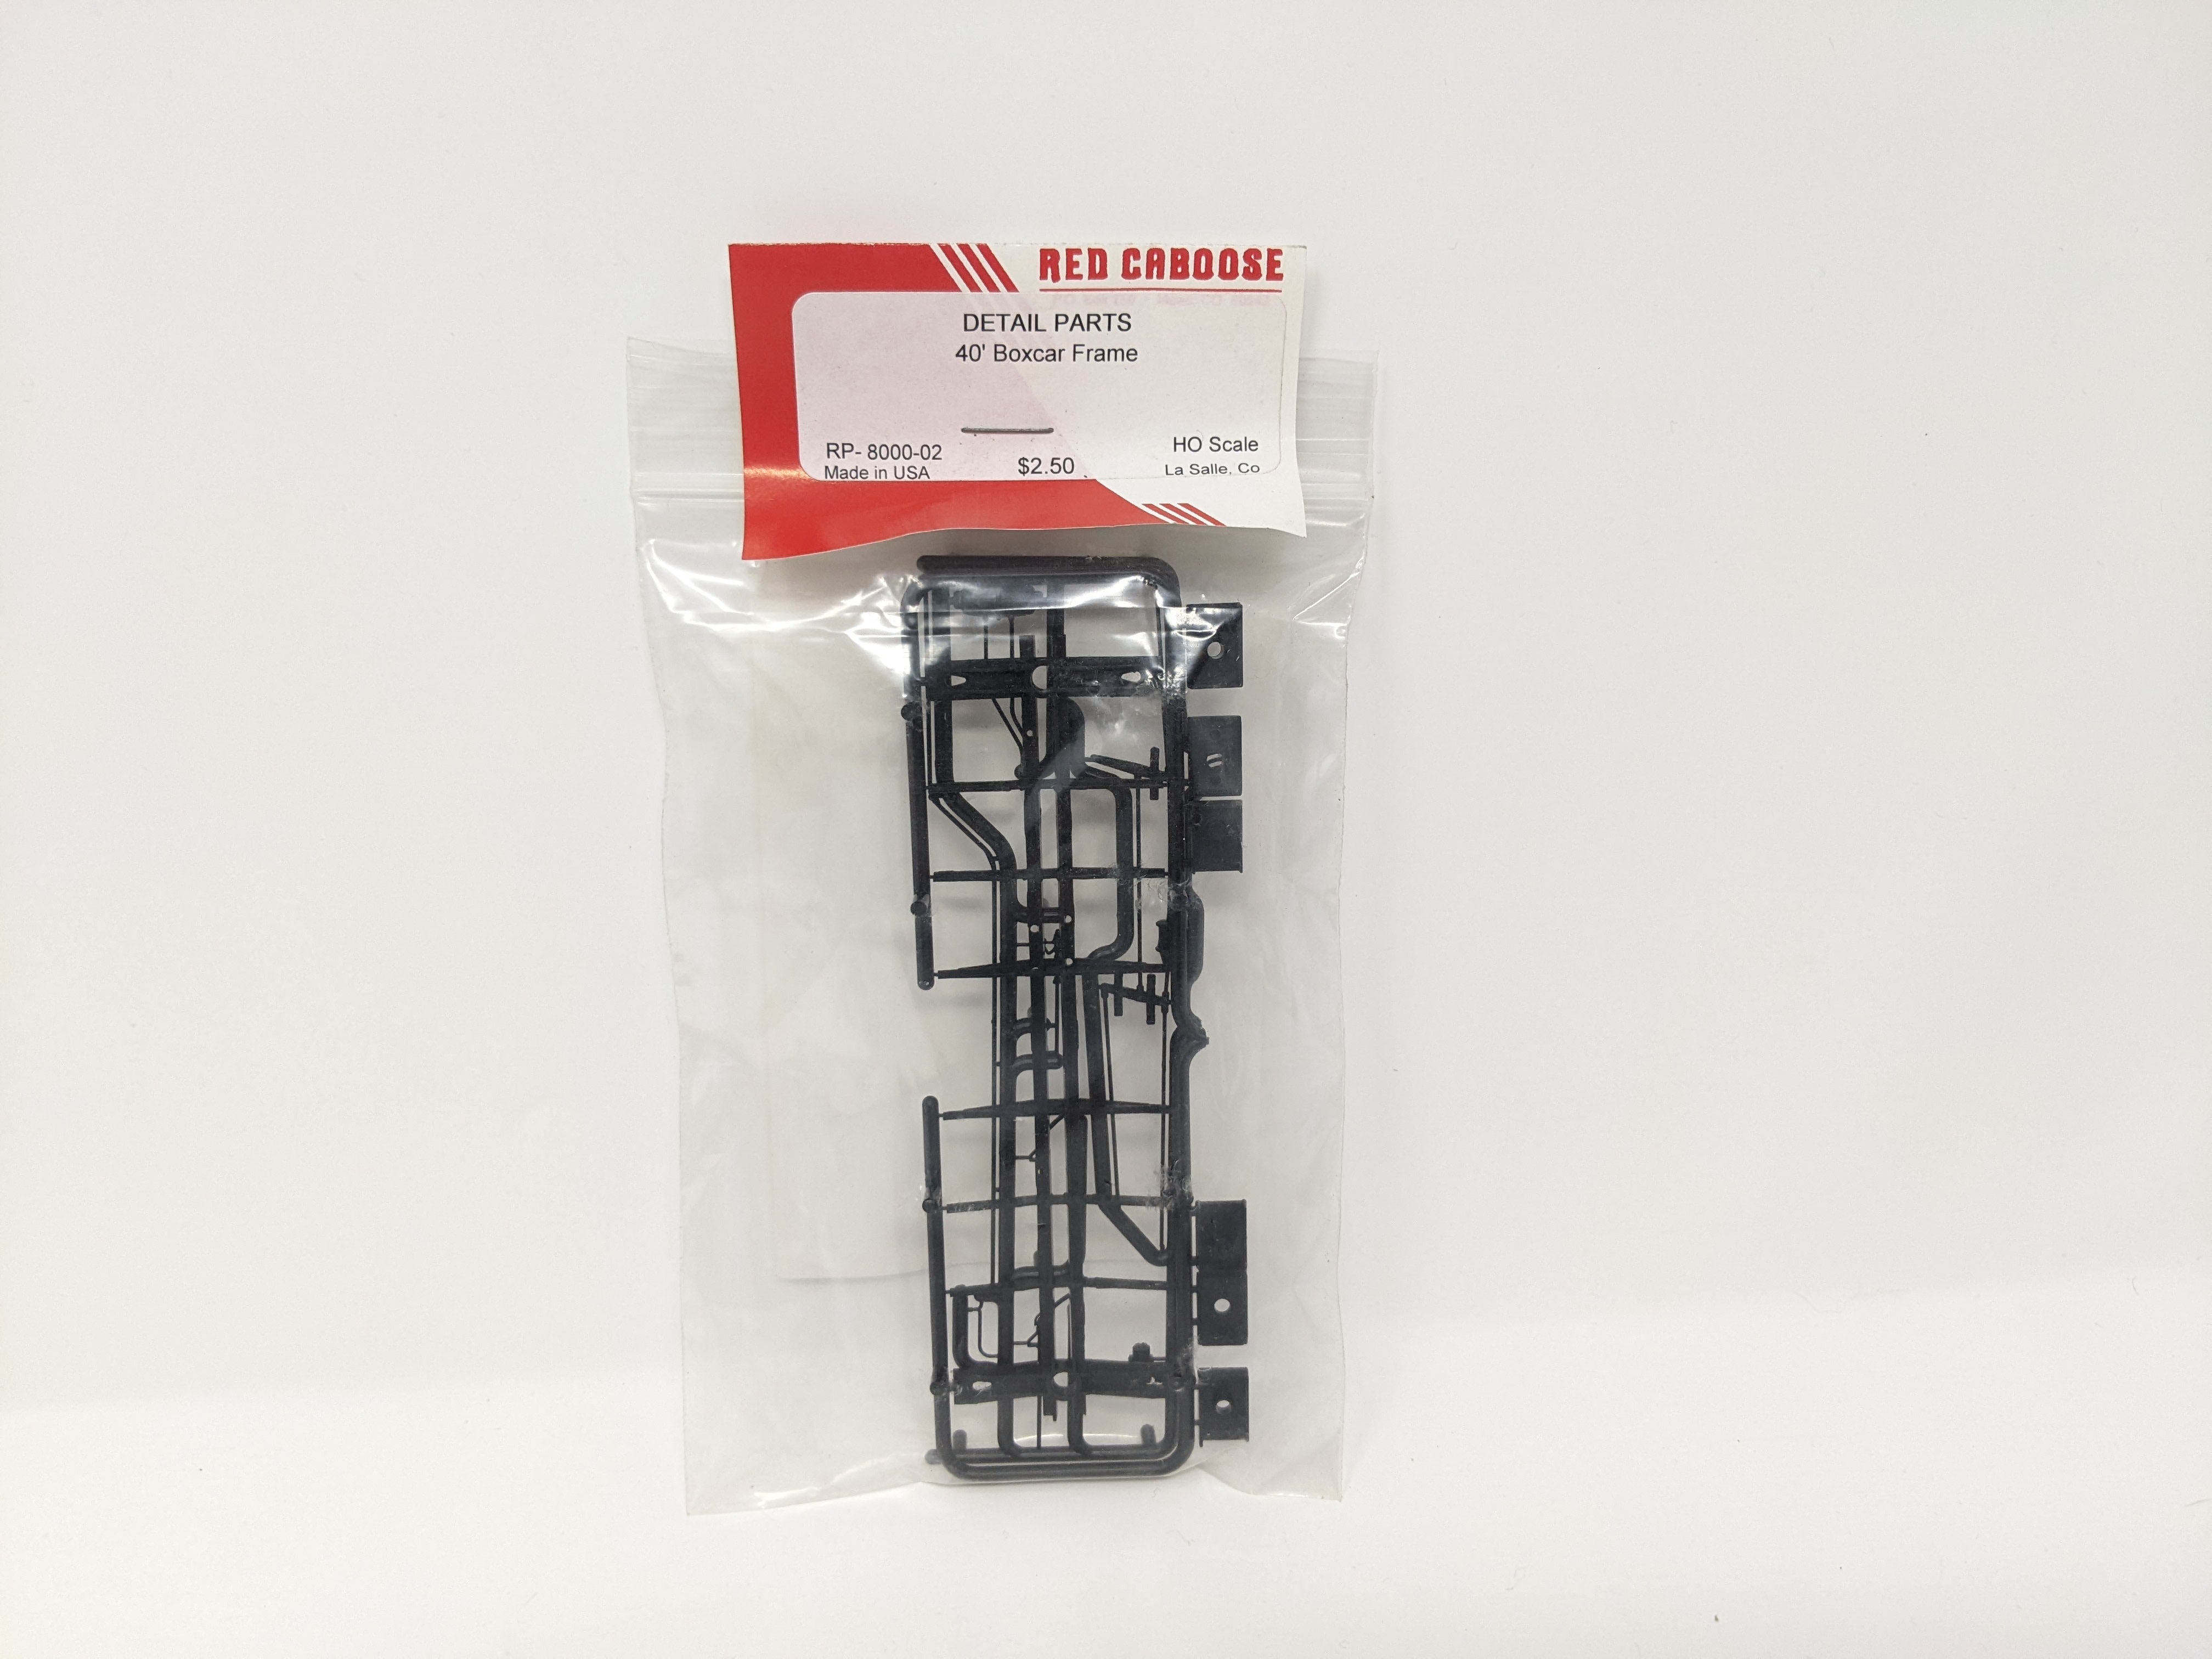 Red Caboose RP-8000-02 HO Scale, 40' Box Car Frame - Black